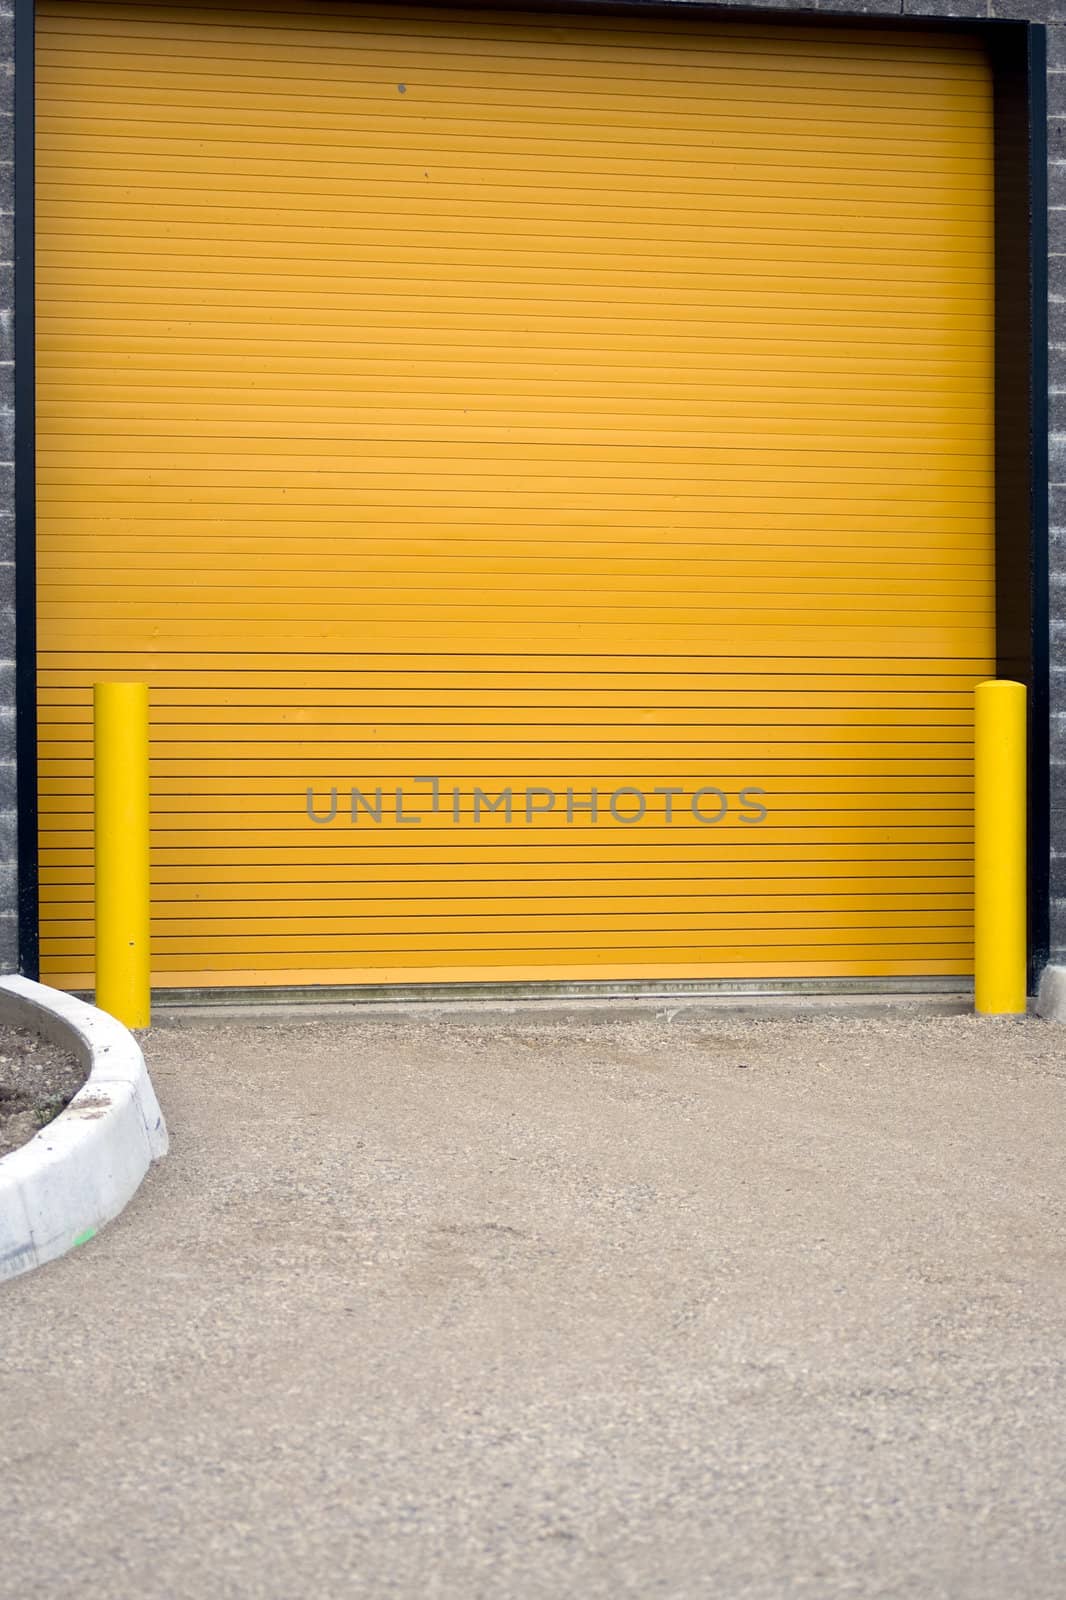 A colorful industrial garage door, with yellow barriers on either side.  This door is actually on the side of a hockey rink, for Zamboni's to exit the rink and dump the snow that they scraped from the ice.